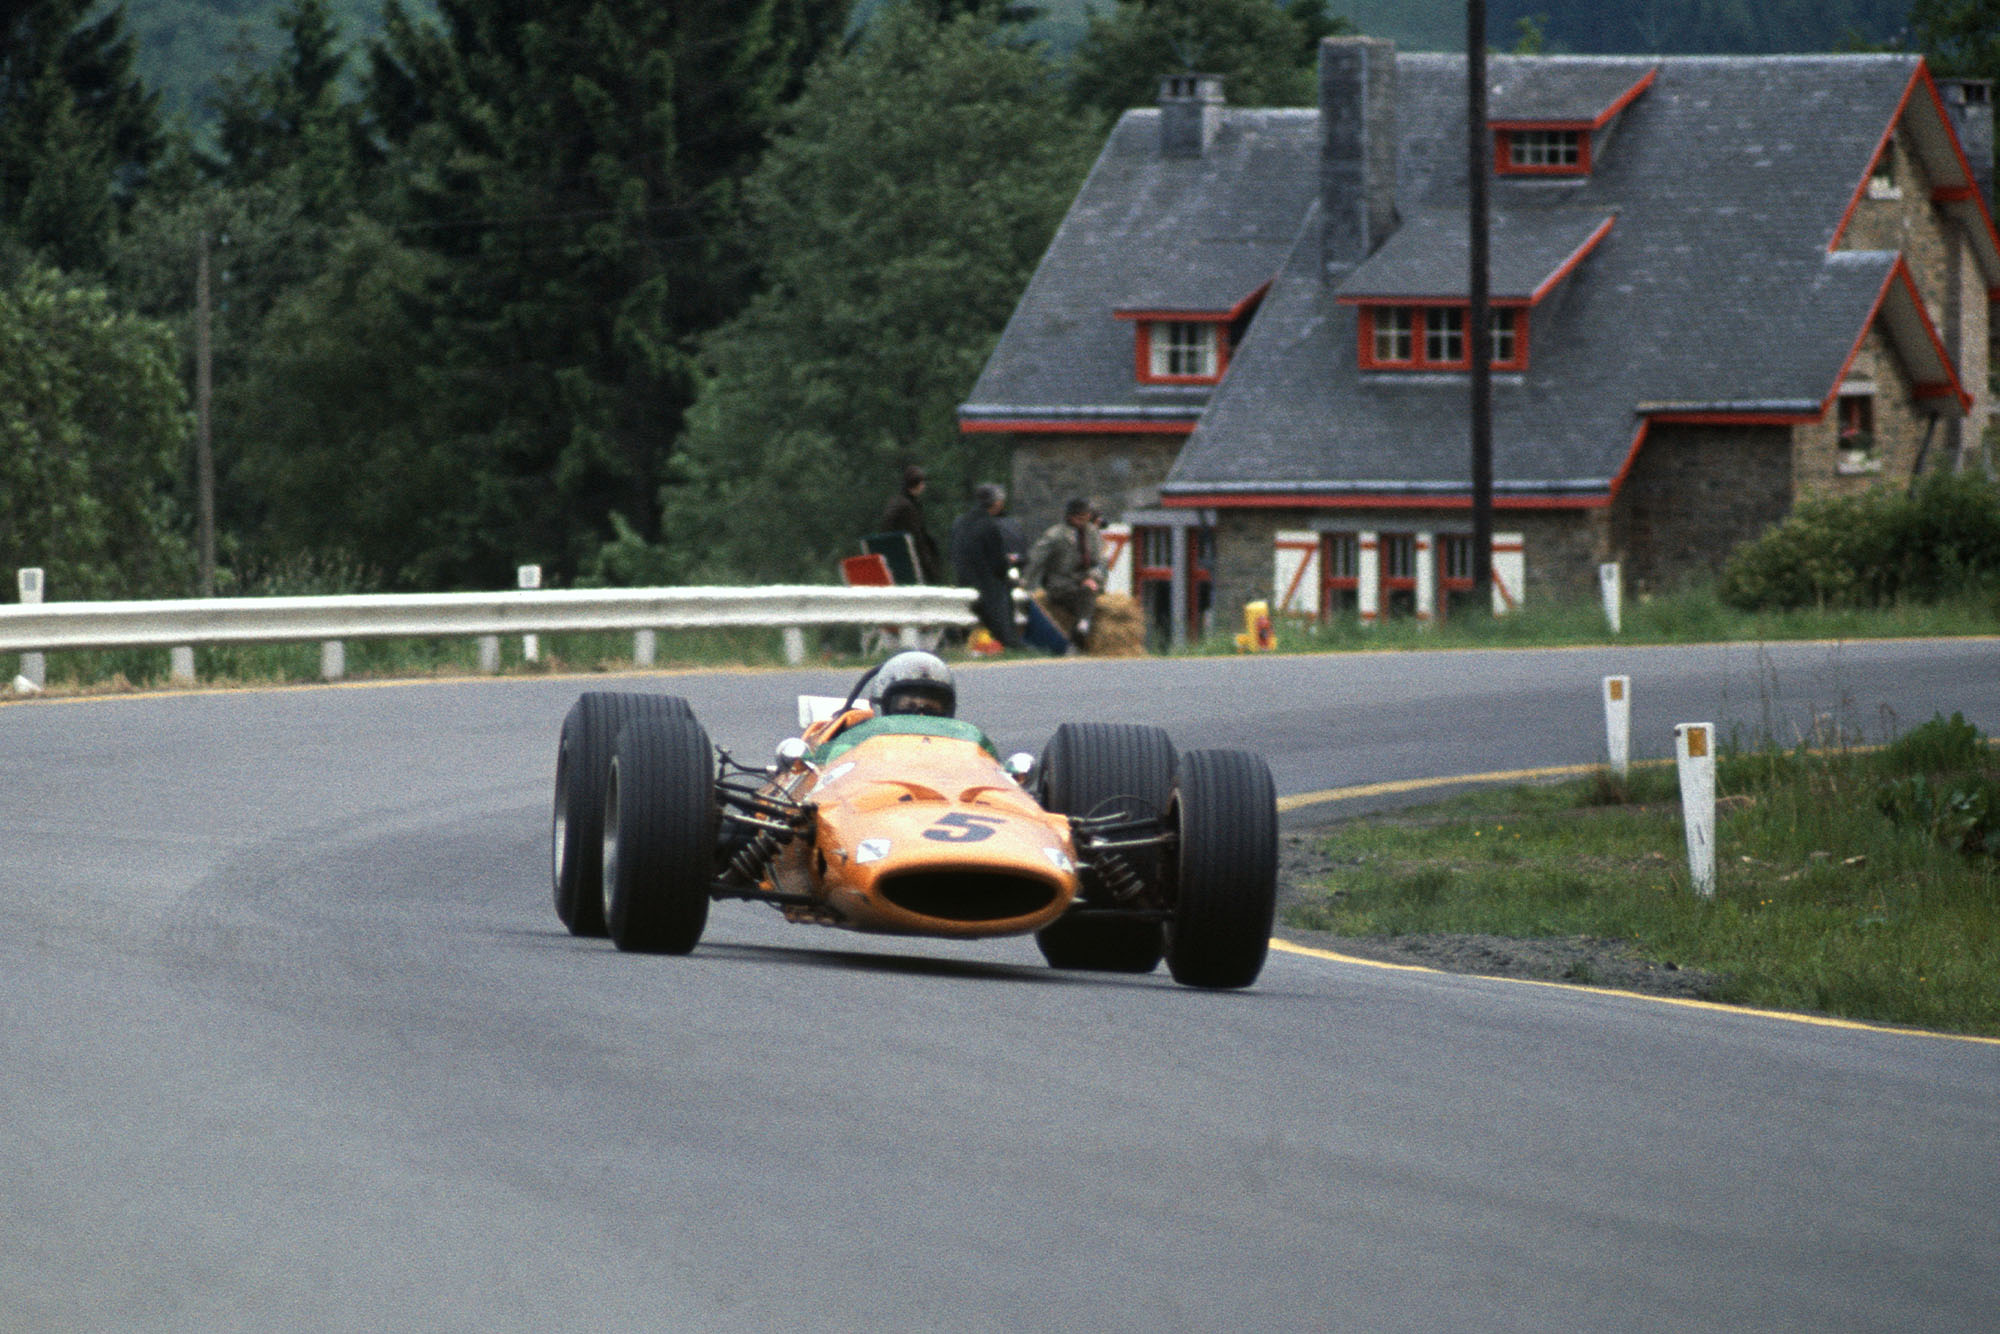 McLaren's first victory at F1 Belgian Grand Prix on 09 June 1968.